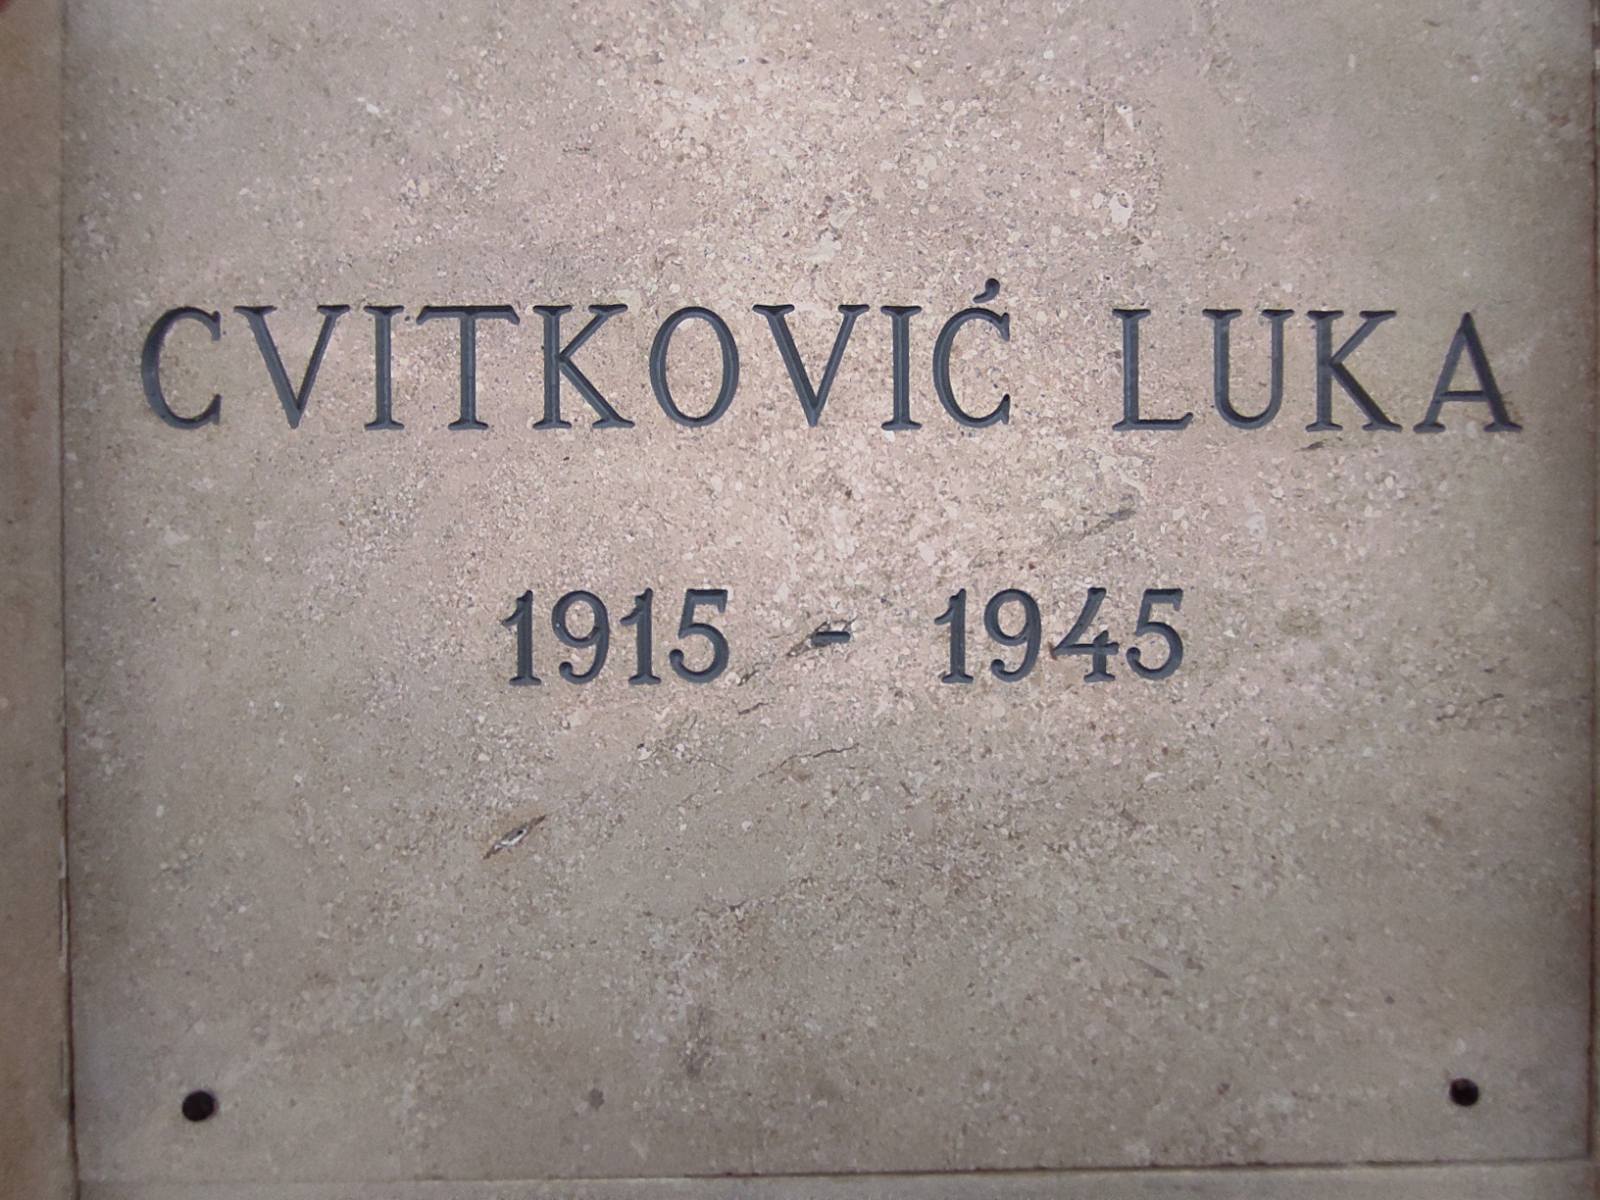 plaque of Luka Cvitković in the crypt of the memorial ossuary at Trsat in Rijeka 